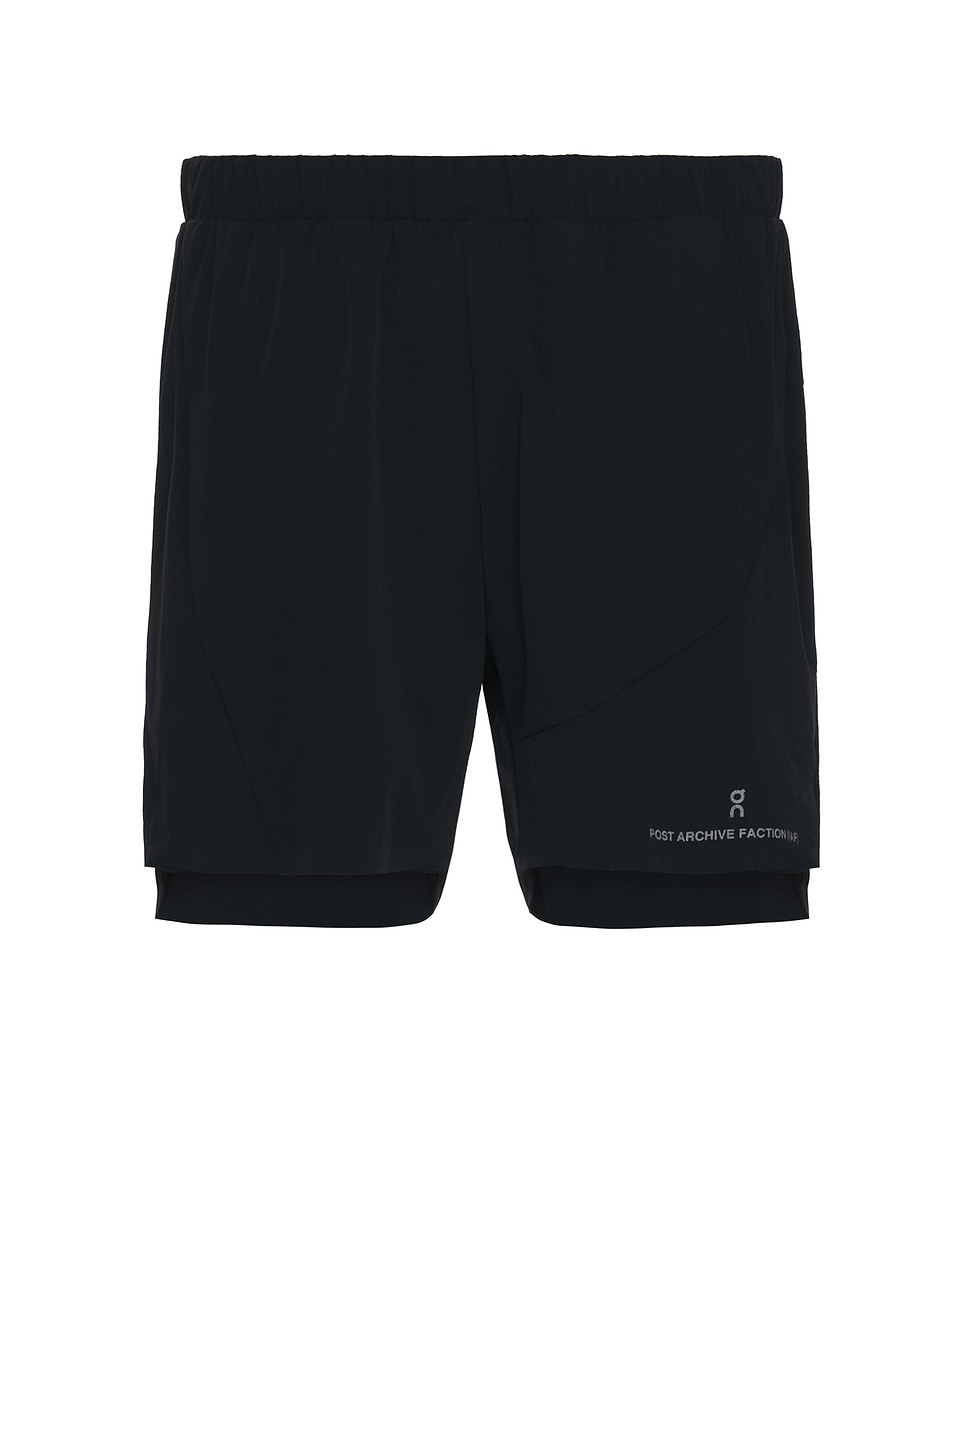 x Post Archive Faction (PAF) Shorts in Black